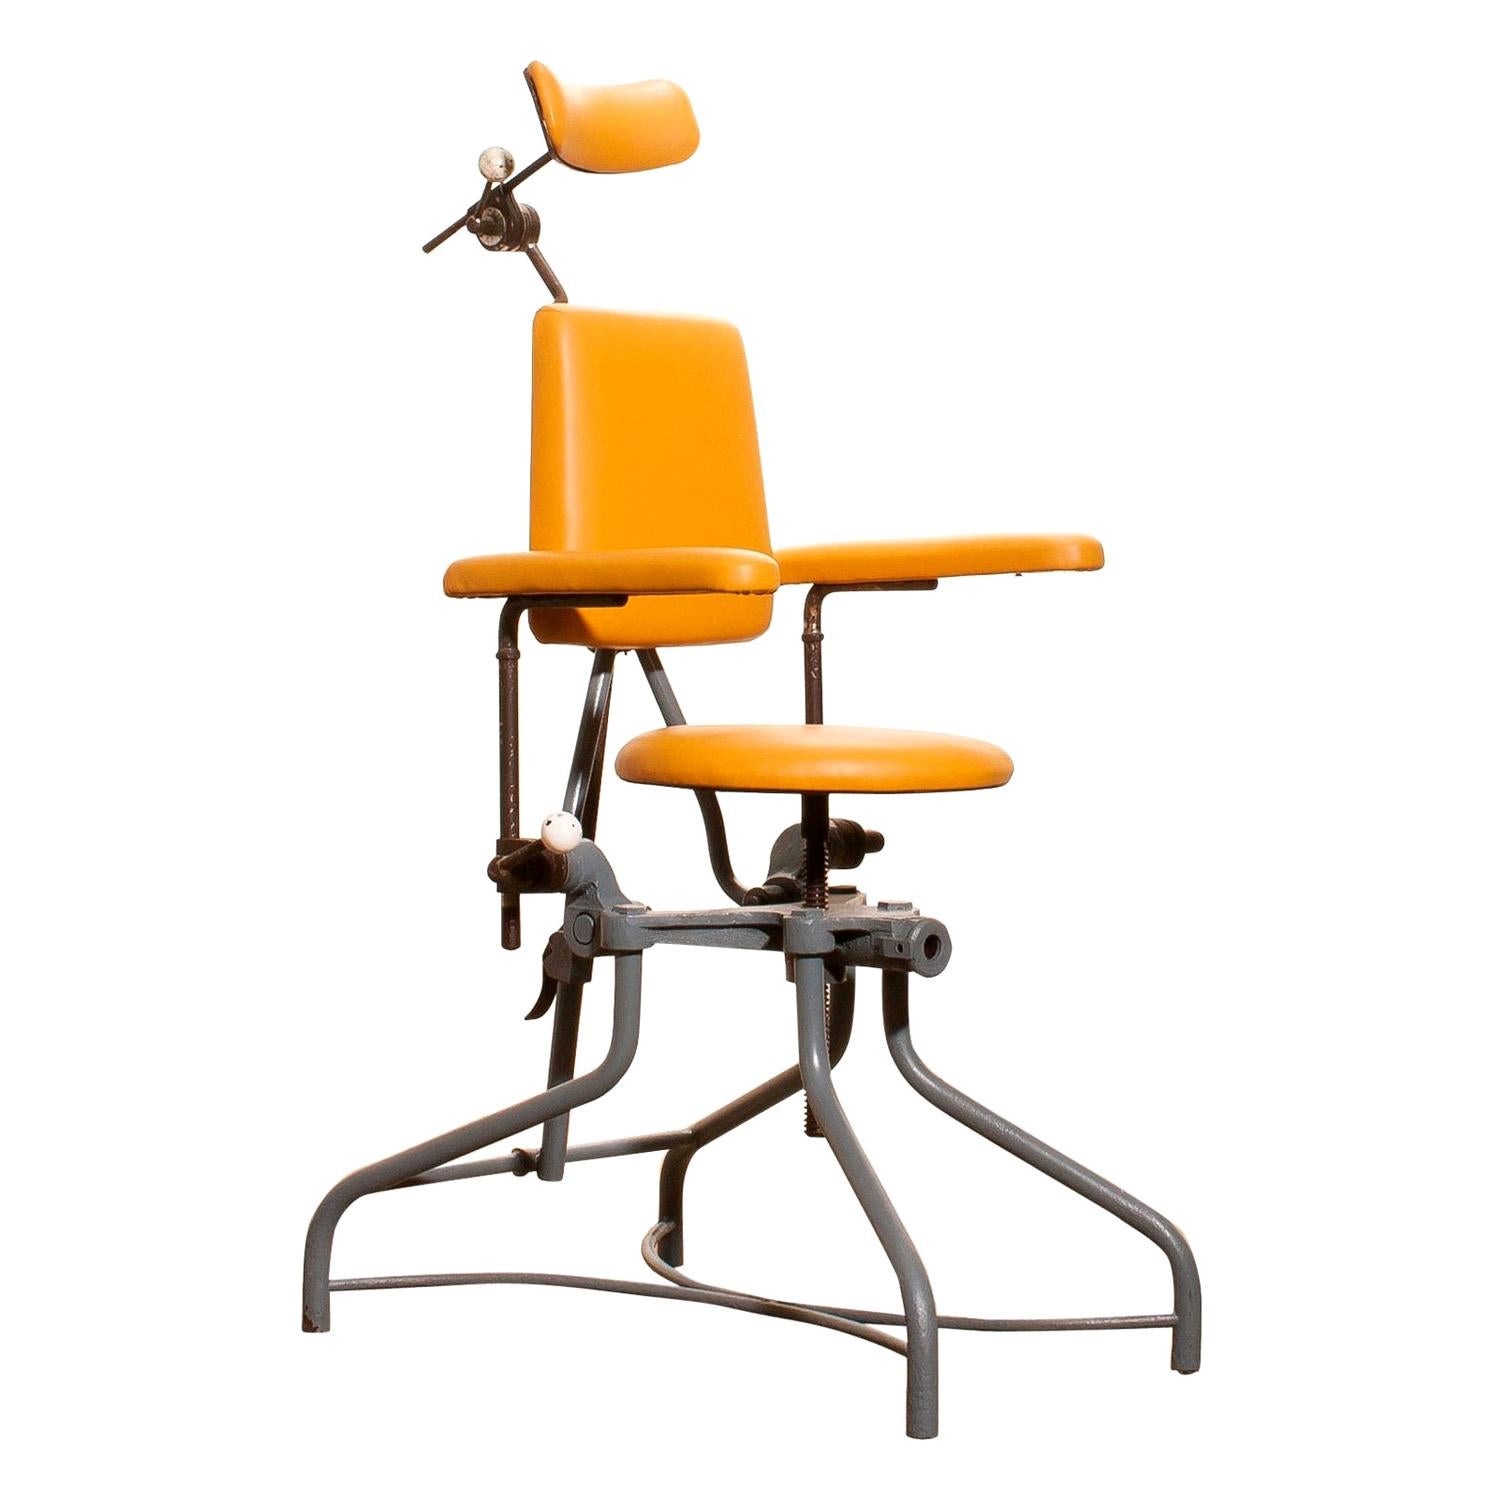 1930s, Steel Medical Chair